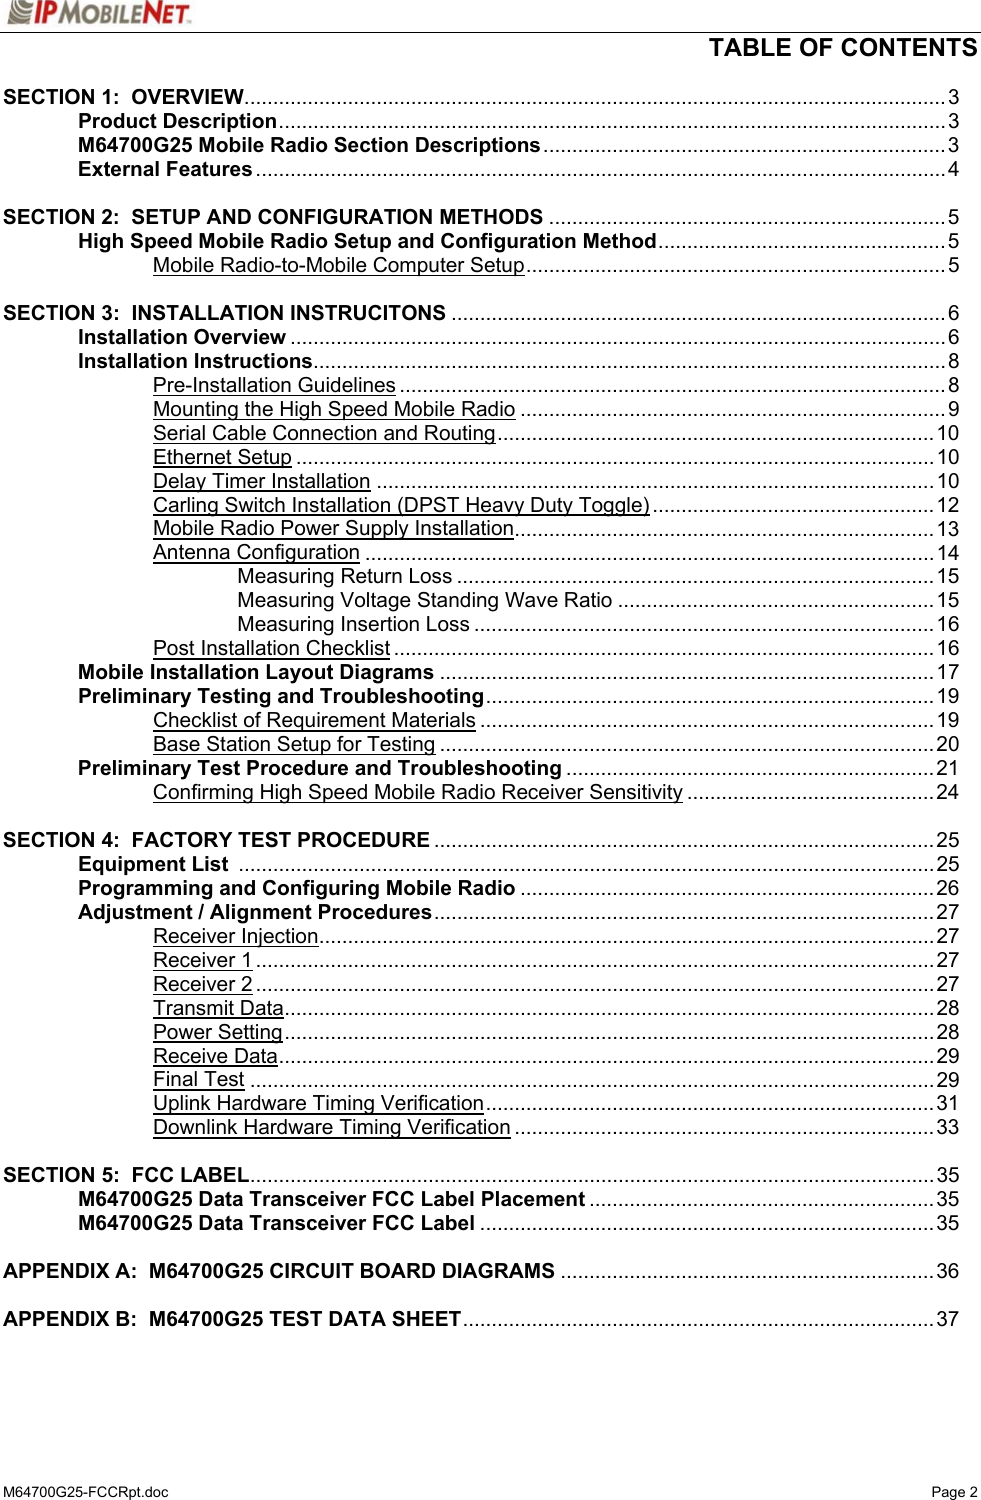   TABLE OF CONTENTS  M64700G25-FCCRpt.doc   Page 2 SECTION 1:  OVERVIEW..........................................................................................................................3  Product Description....................................................................................................................3  M64700G25 Mobile Radio Section Descriptions......................................................................3  External Features........................................................................................................................4    SECTION 2:  SETUP AND CONFIGURATION METHODS .....................................................................5   High Speed Mobile Radio Setup and Configuration Method..................................................5   Mobile Radio-to-Mobile Computer Setup......................................................................... 5  SECTION 3:  INSTALLATION INSTRUCITONS ......................................................................................6  Installation Overview ..................................................................................................................6  Installation Instructions..............................................................................................................8   Pre-Installation Guidelines ............................................................................................... 8     Mounting the High Speed Mobile Radio ..........................................................................9     Serial Cable Connection and Routing............................................................................10   Ethernet Setup ...............................................................................................................10   Delay Timer Installation .................................................................................................10     Carling Switch Installation (DPST Heavy Duty Toggle) .................................................12     Mobile Radio Power Supply Installation.........................................................................13   Antenna Configuration ...................................................................................................14     Measuring Return Loss ...................................................................................15     Measuring Voltage Standing Wave Ratio .......................................................15     Measuring Insertion Loss ................................................................................16   Post Installation Checklist ..............................................................................................16  Mobile Installation Layout Diagrams ......................................................................................17  Preliminary Testing and Troubleshooting..............................................................................19   Checklist of Requirement Materials ...............................................................................19     Base Station Setup for Testing ......................................................................................20  Preliminary Test Procedure and Troubleshooting ................................................................21   Confirming High Speed Mobile Radio Receiver Sensitivity ...........................................24  SECTION 4:  FACTORY TEST PROCEDURE .......................................................................................25  Equipment List .........................................................................................................................25   Programming and Configuring Mobile Radio ........................................................................26   Adjustment / Alignment Procedures....................................................................................... 27   Receiver Injection...........................................................................................................27   Receiver 1......................................................................................................................27   Receiver 2......................................................................................................................27   Transmit Data.................................................................................................................28   Power Setting................................................................................................................. 28   Receive Data..................................................................................................................29   Final Test .......................................................................................................................29     Uplink Hardware Timing Verification..............................................................................31     Downlink Hardware Timing Verification .........................................................................33  SECTION 5:  FCC LABEL.......................................................................................................................35   M64700G25 Data Transceiver FCC Label Placement ............................................................35  M64700G25 Data Transceiver FCC Label ...............................................................................35  APPENDIX A:  M64700G25 CIRCUIT BOARD DIAGRAMS .................................................................36  APPENDIX B:  M64700G25 TEST DATA SHEET..................................................................................37 